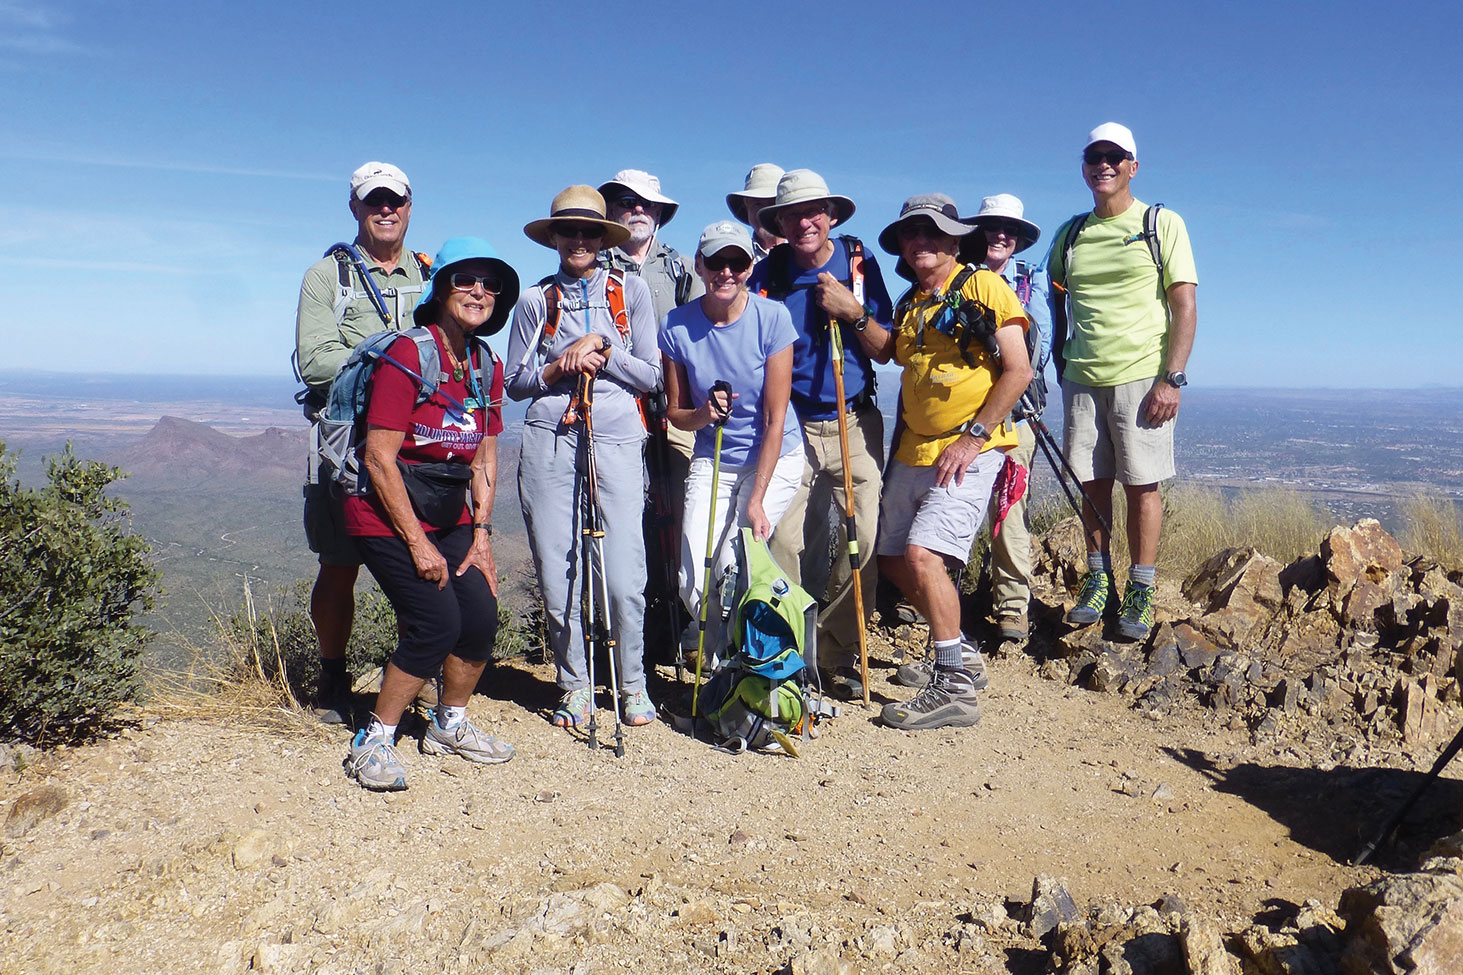 On top of Wasson Peak: Dave Corrigan, Elisabeth Wheeler, Margaret Valair, Fred Norris, Joyce Maurizzi, Rob Simms, Joe Maurizzi, Sy Efron, Myrna Simms and Mike Wolters; photo by Sharon Simpson